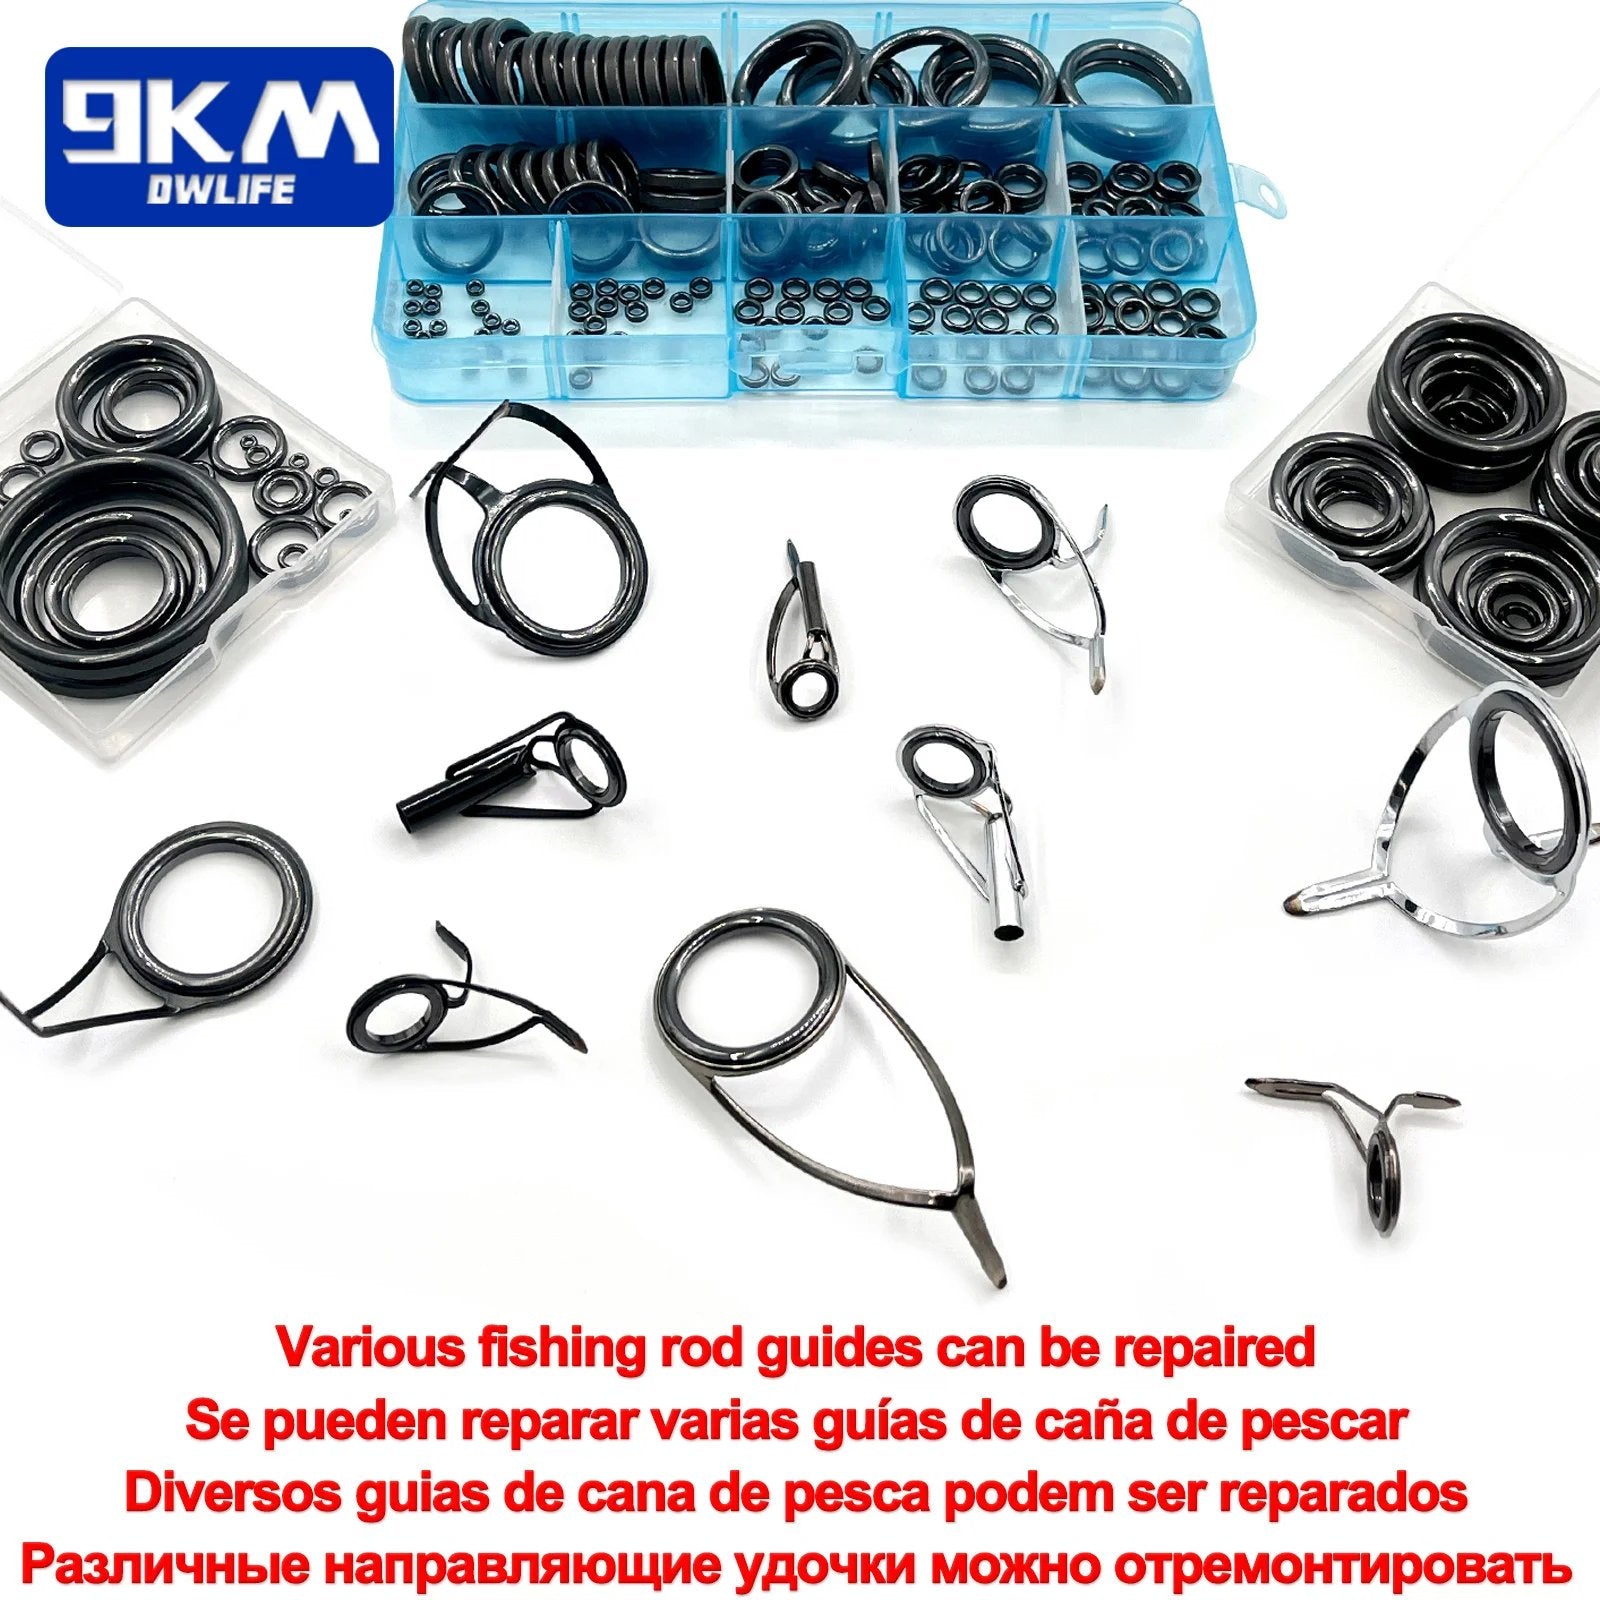 Guide Ring Set, Lure Fishing Rod Guide Ring Stainless Steel Ceramic  Lightweight Wear Resistant Anti Entwist Fishing Rod Repair Kit For Fish  Pond 